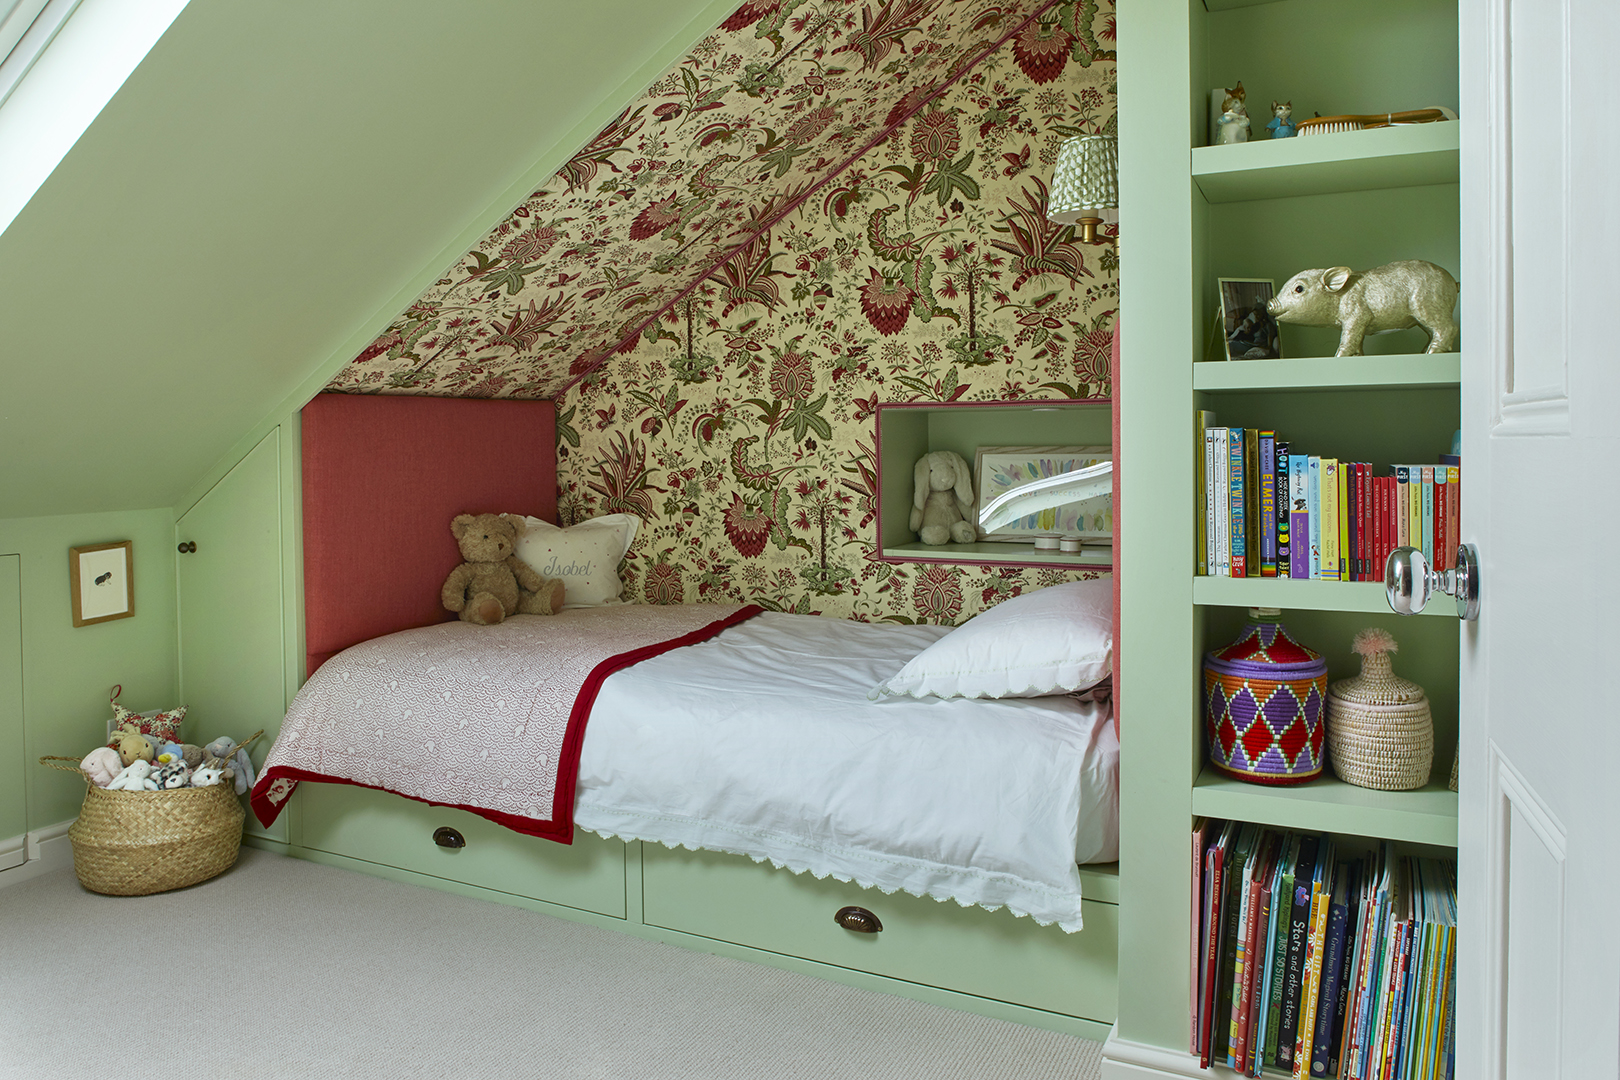 Girl's bedroom with pistachio-colored walls and bed nook with red floral fabric.